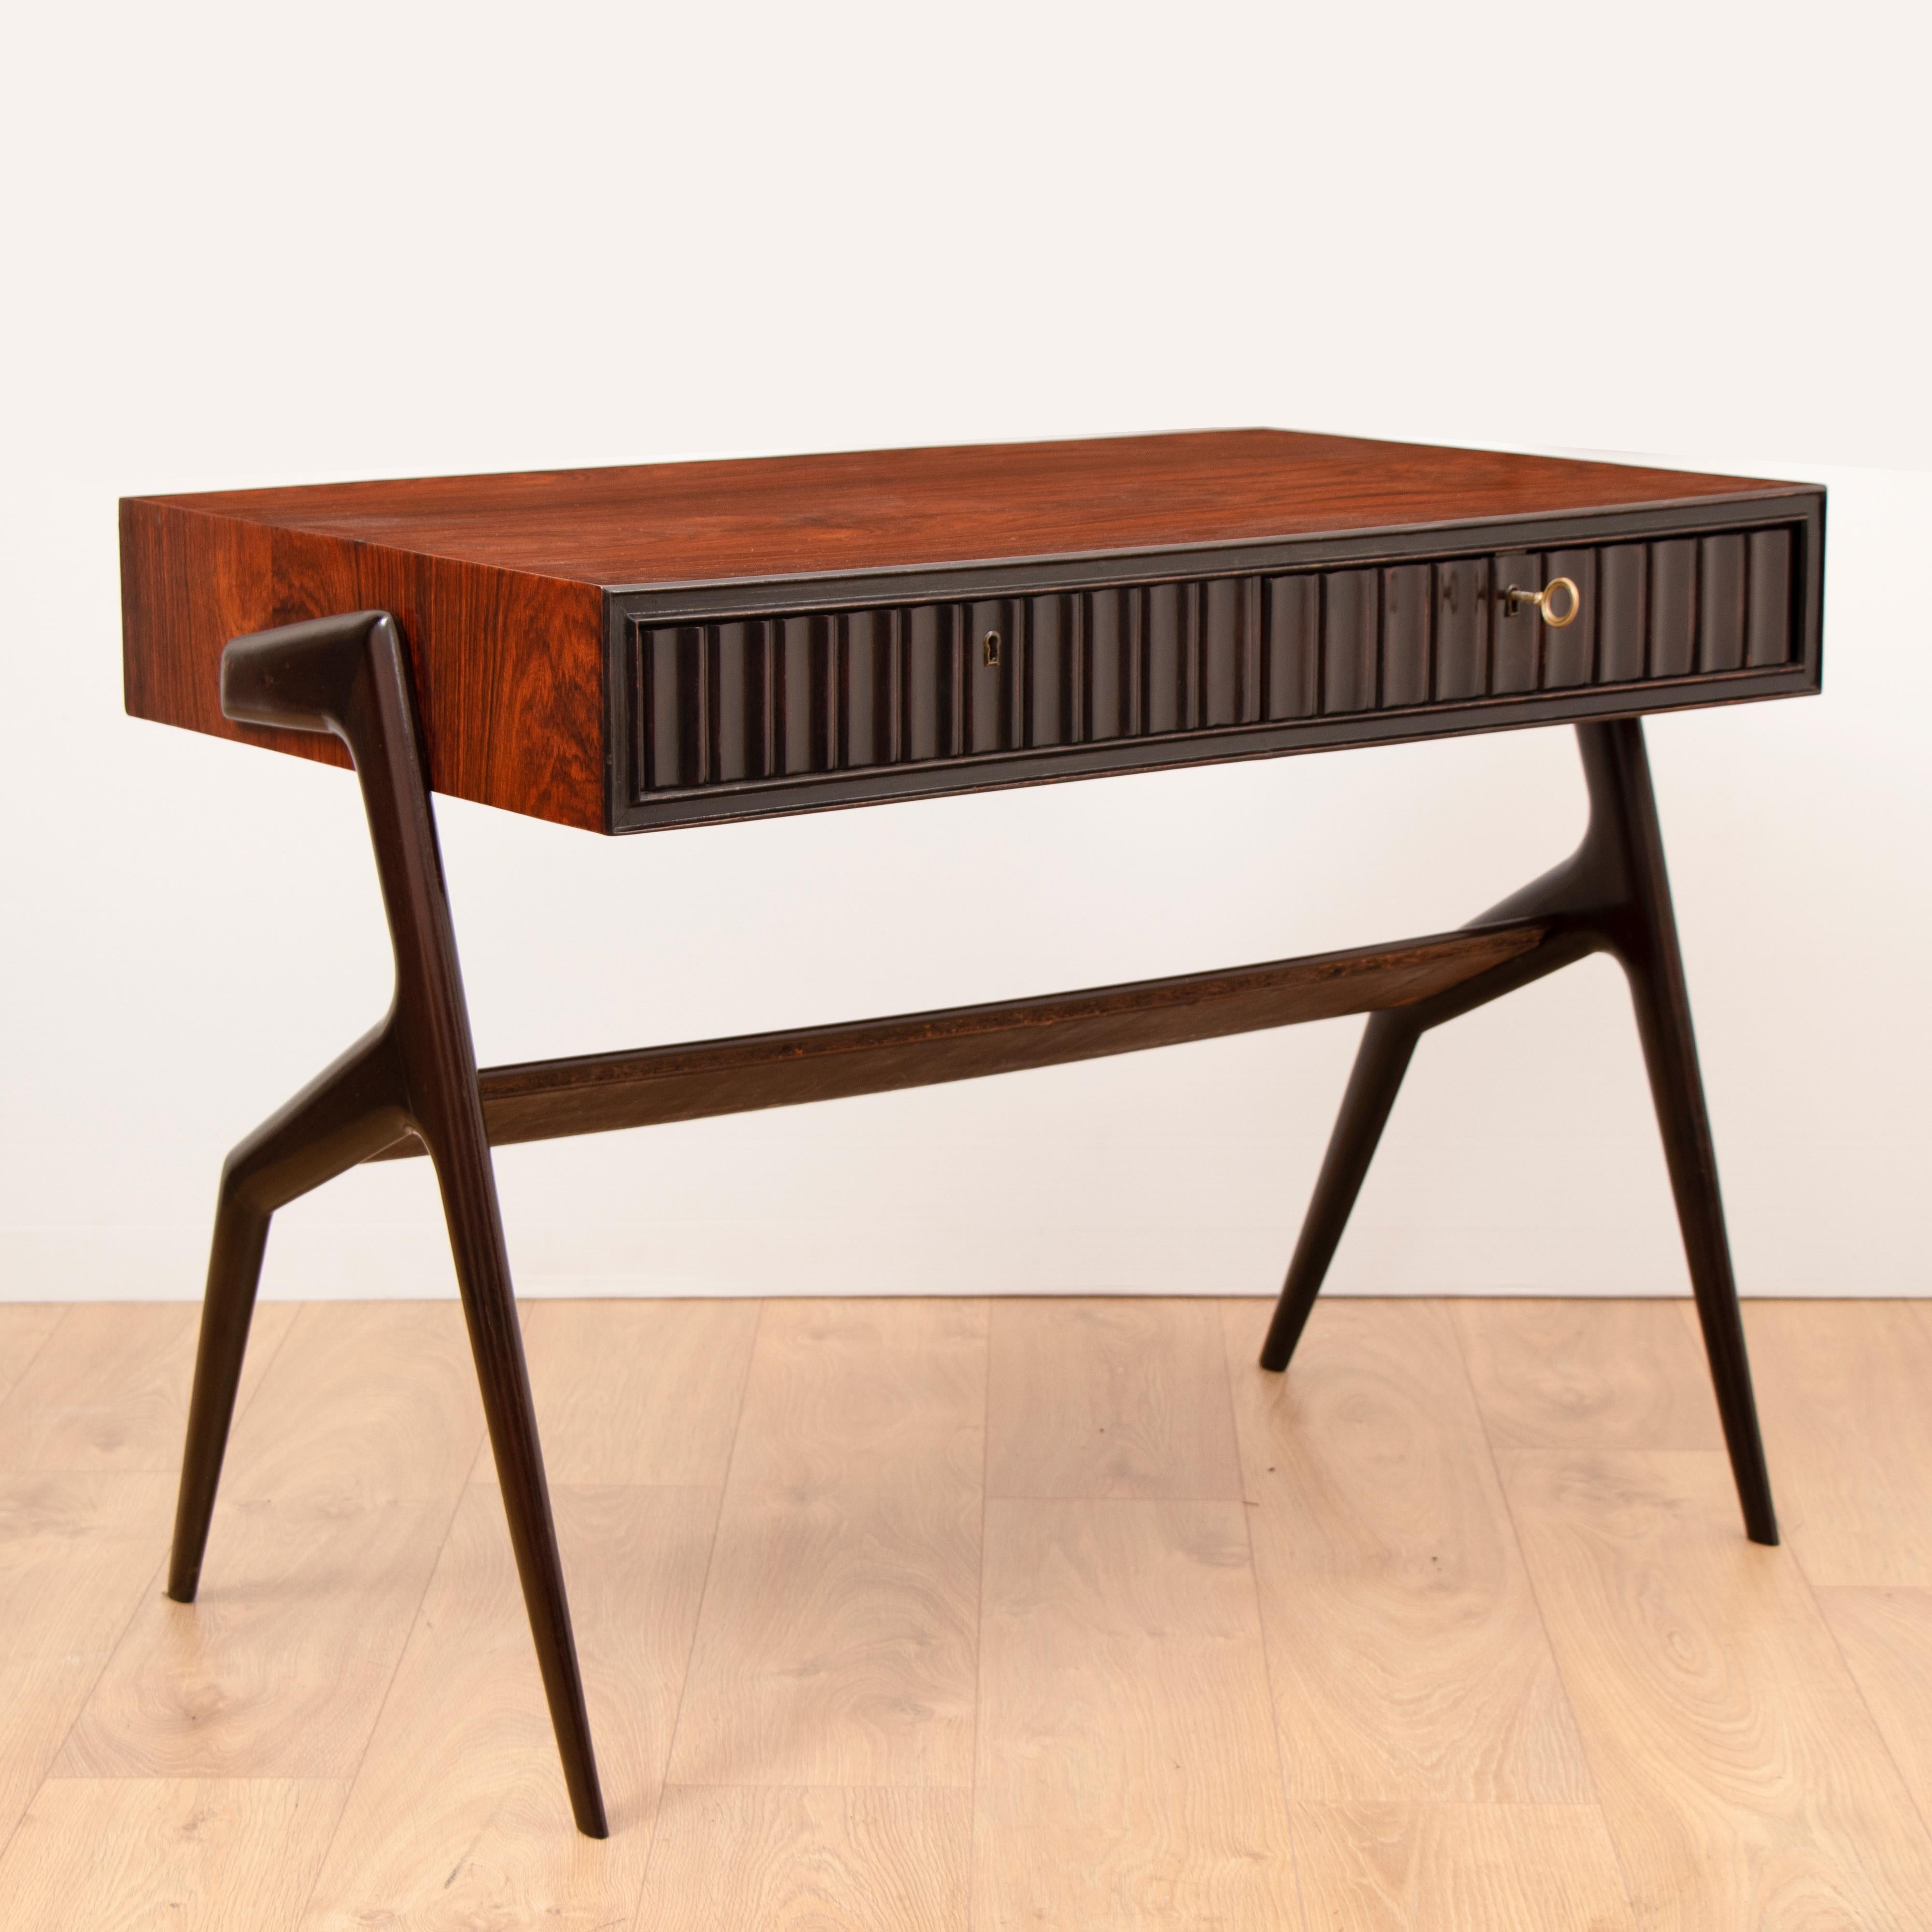 A rare 1950s two-drawer vintage Brazilian rosewood and beech writing desk in the style of Ico Parisi. The feature, sculptured, legs have a deep dark brown ebonised stain which contrasts against the Rosewood of the desk. A central angled display